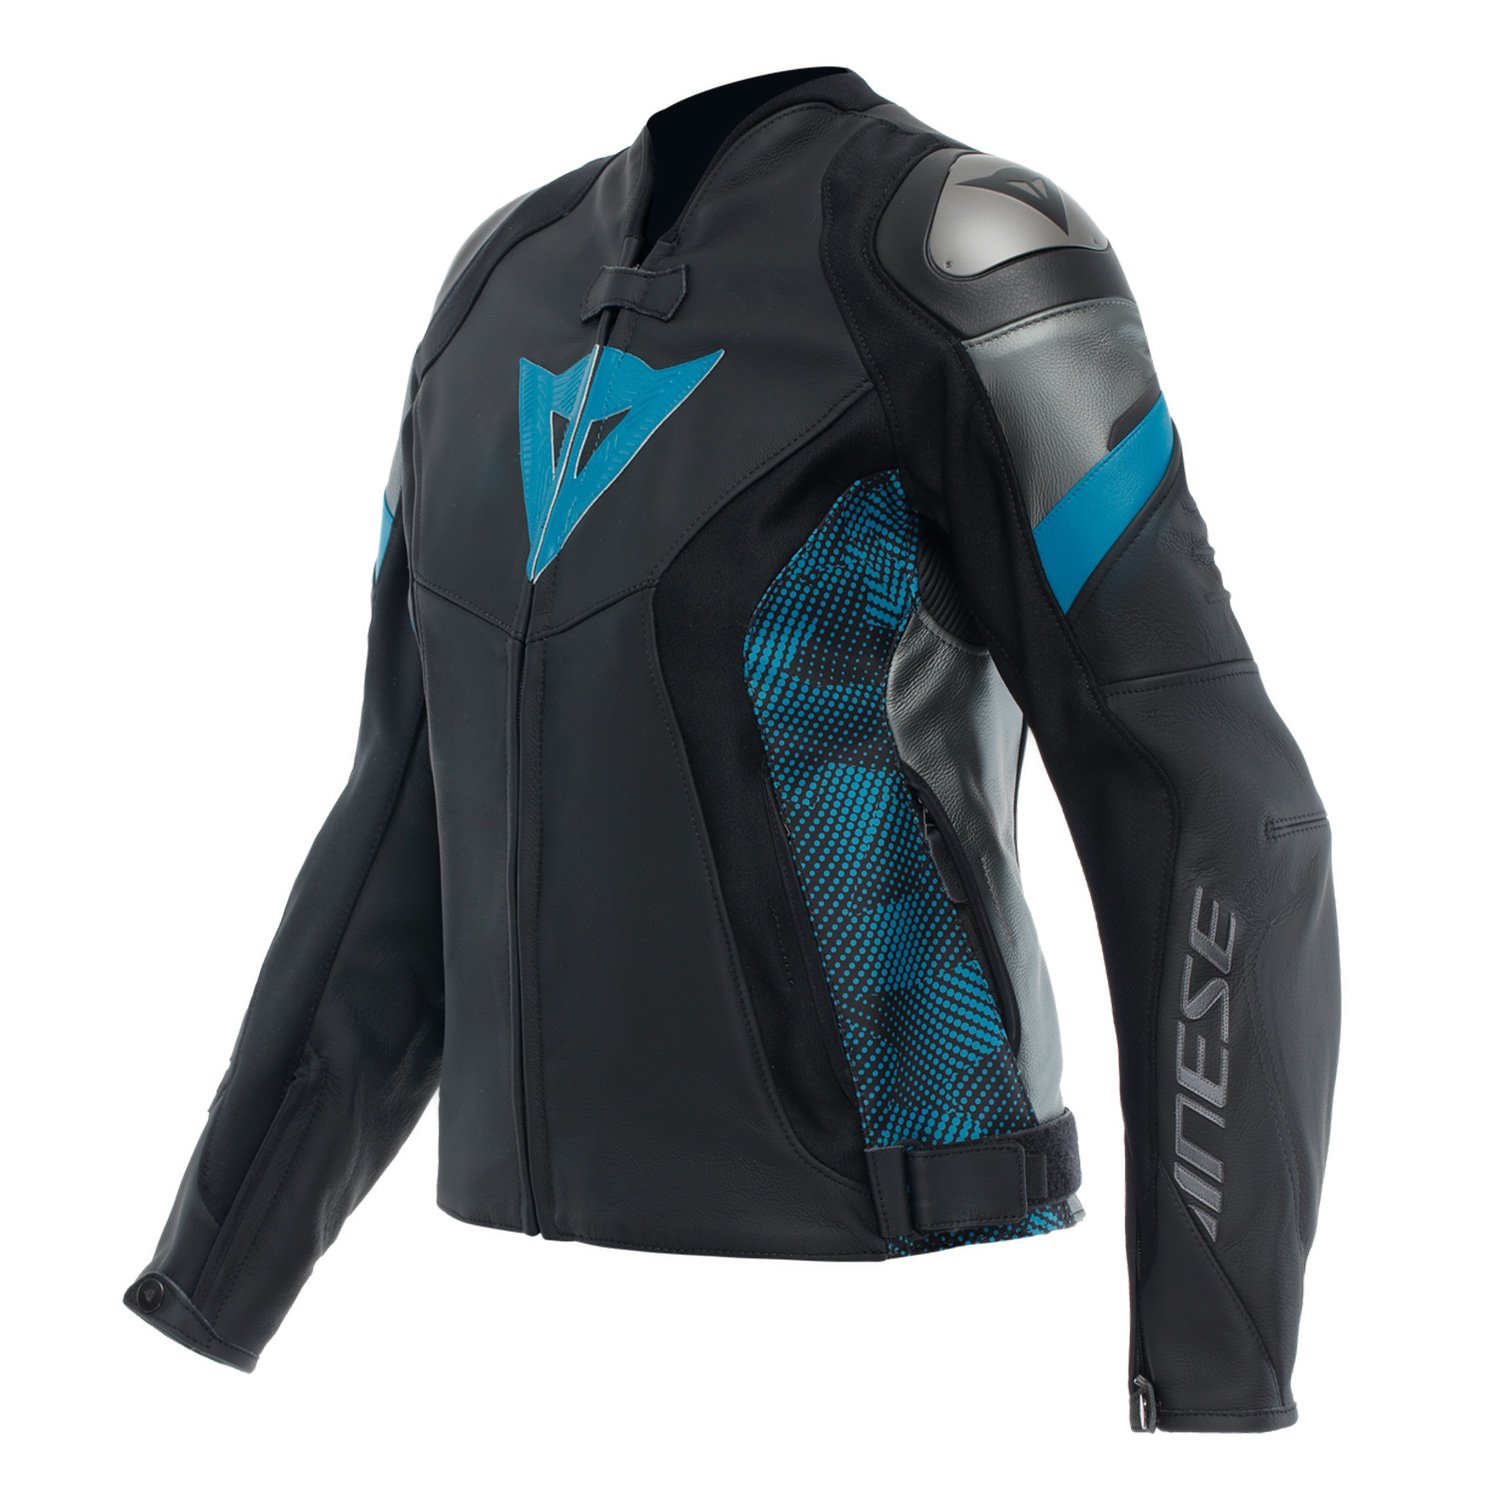 Image of Dainese Avro 5 Leather Jacket WMN Black Teal Anthracite Size 44 EN